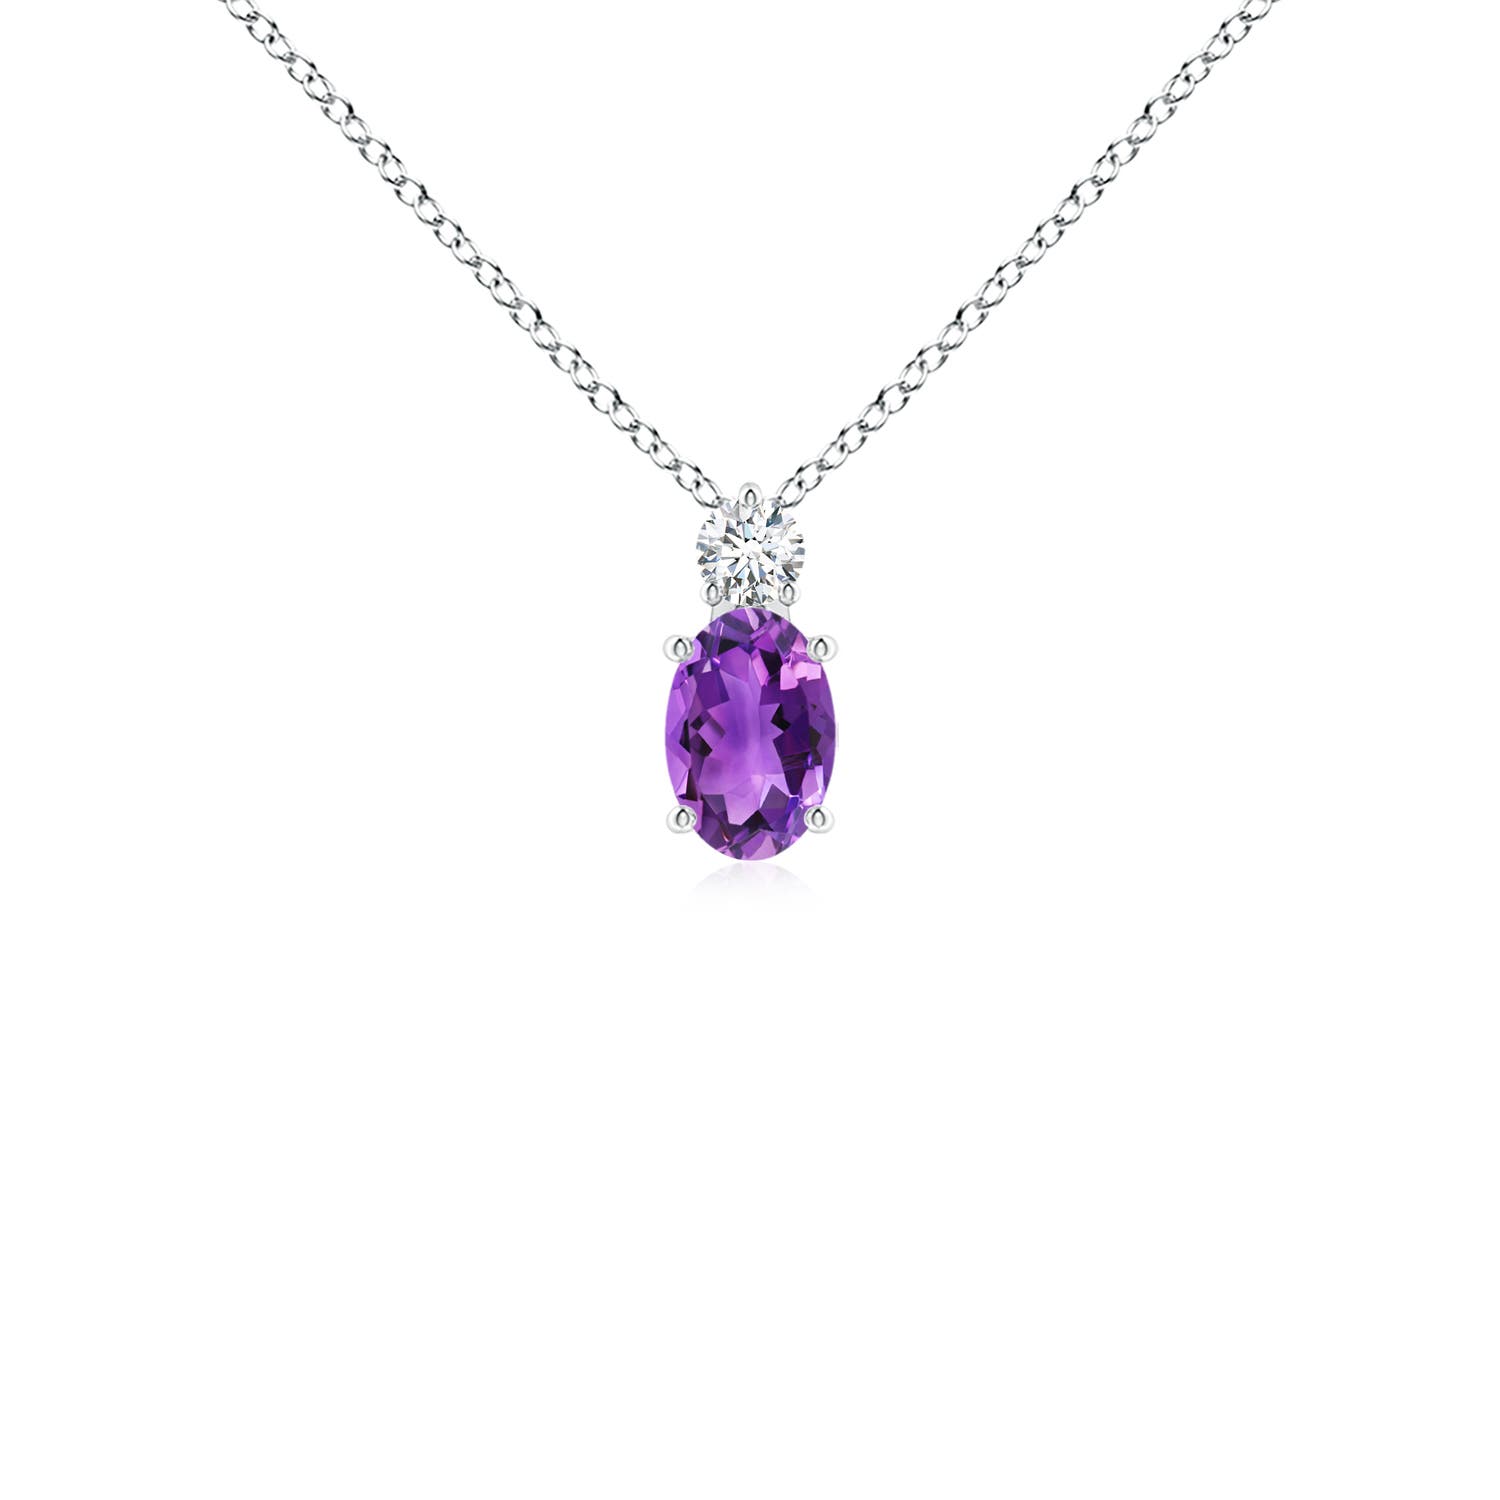 AAA - Amethyst / 0.47 CT / 14 KT White Gold